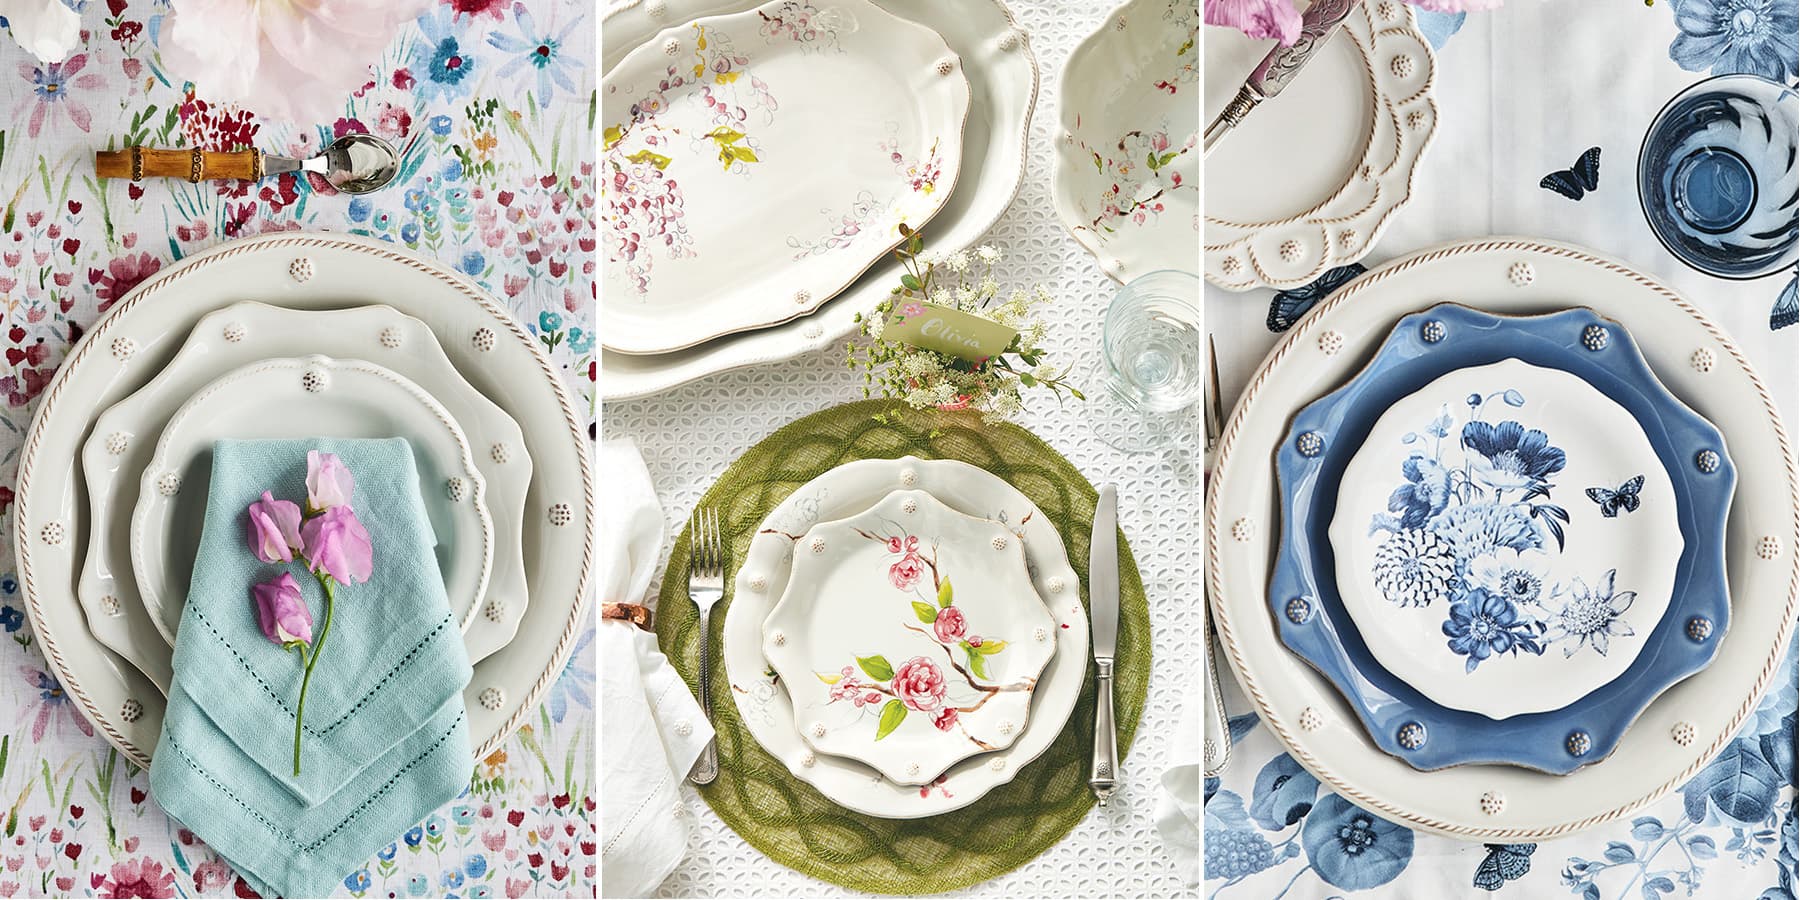 Transform our everyday white place settings into a quintessential Easter feast.